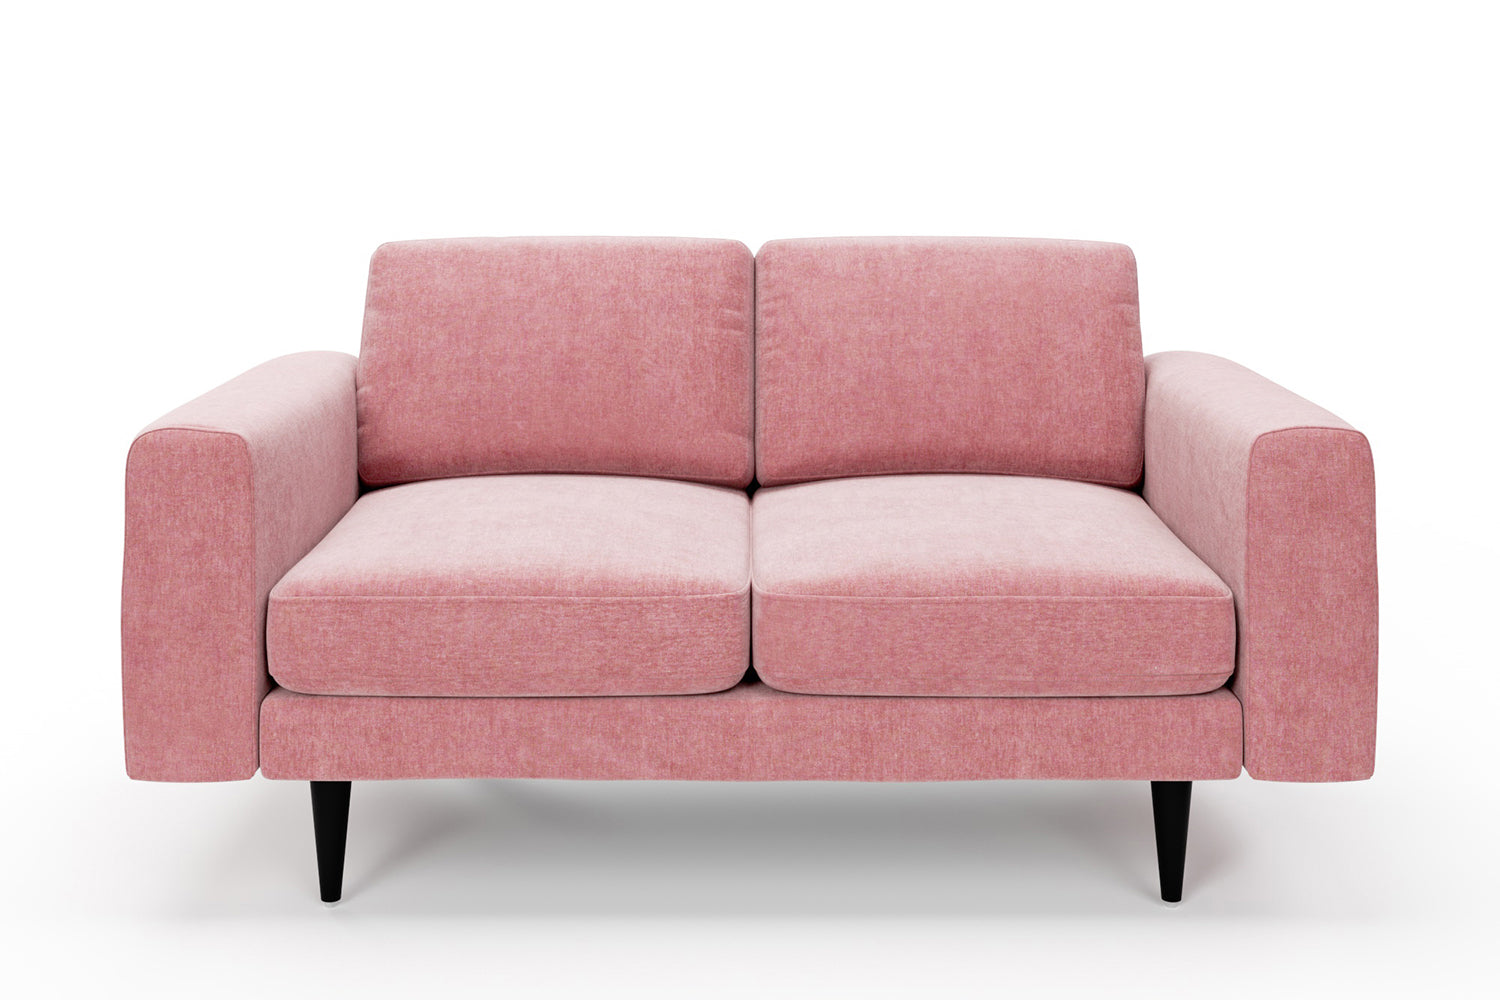 SNUG | The Big Chill 2 Seater Sofa in Blush Coral variant_40621880082480